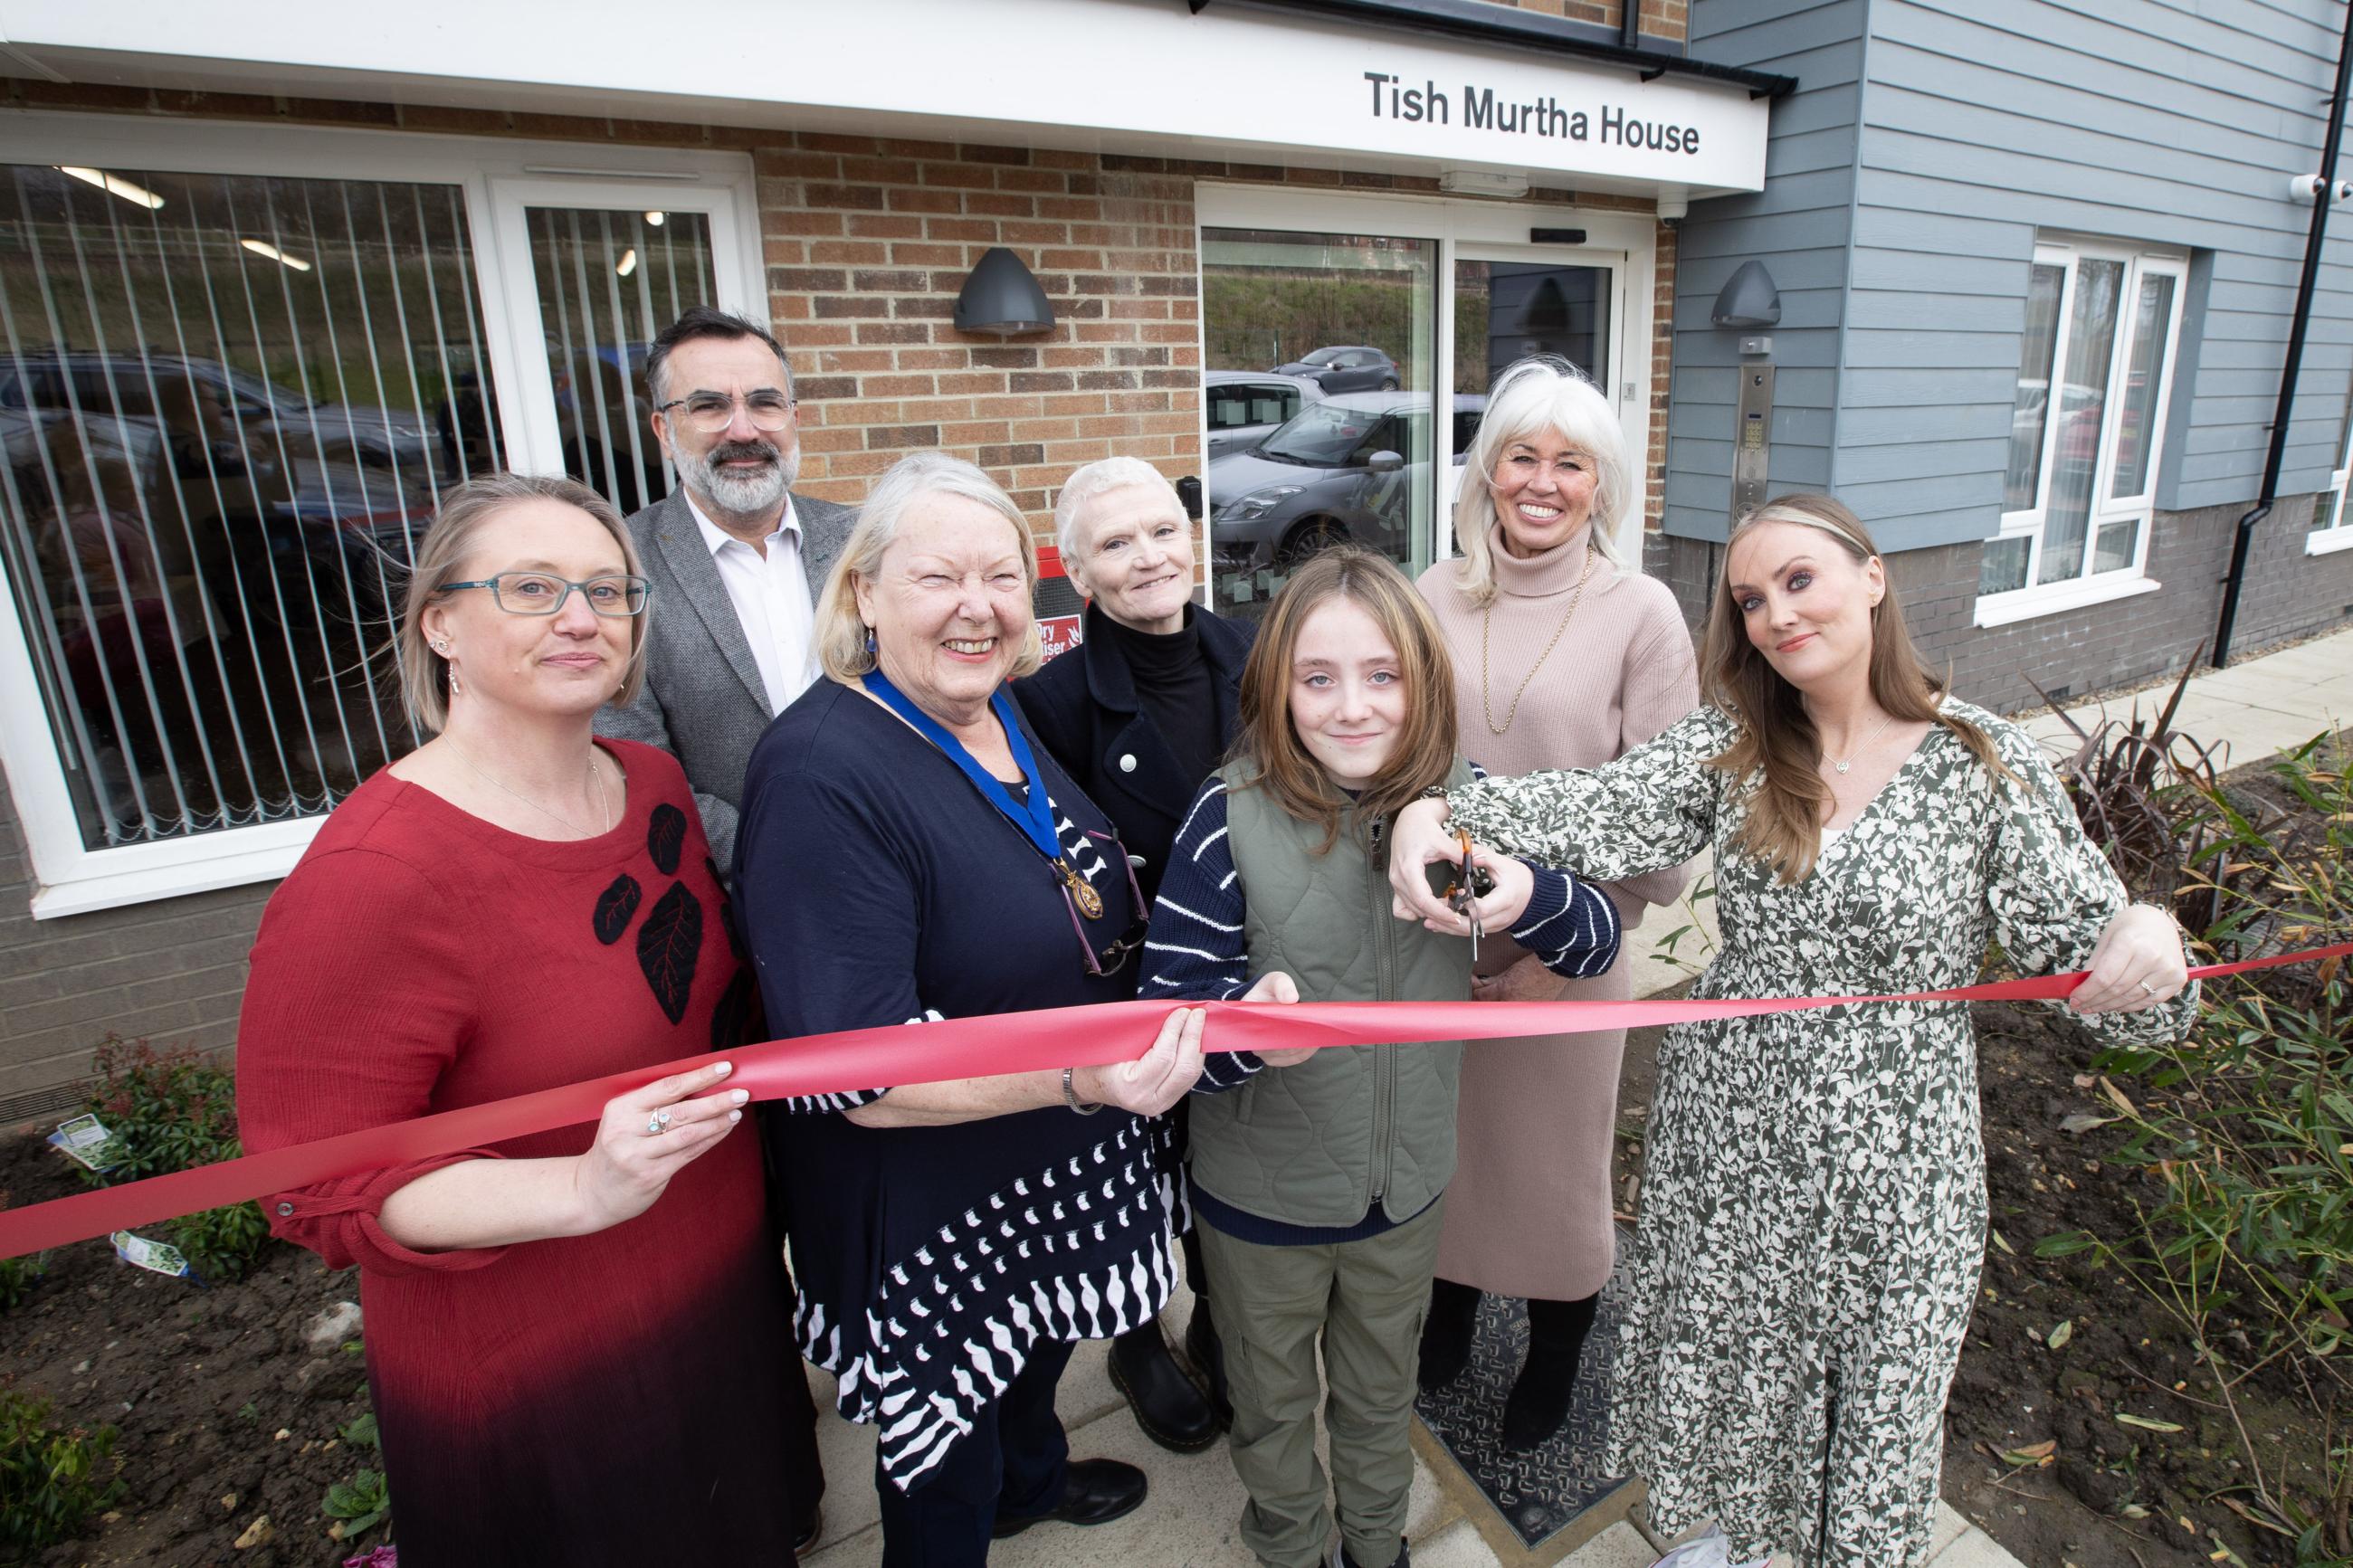 Ribbon cutting at the opening of Tish Murtha House